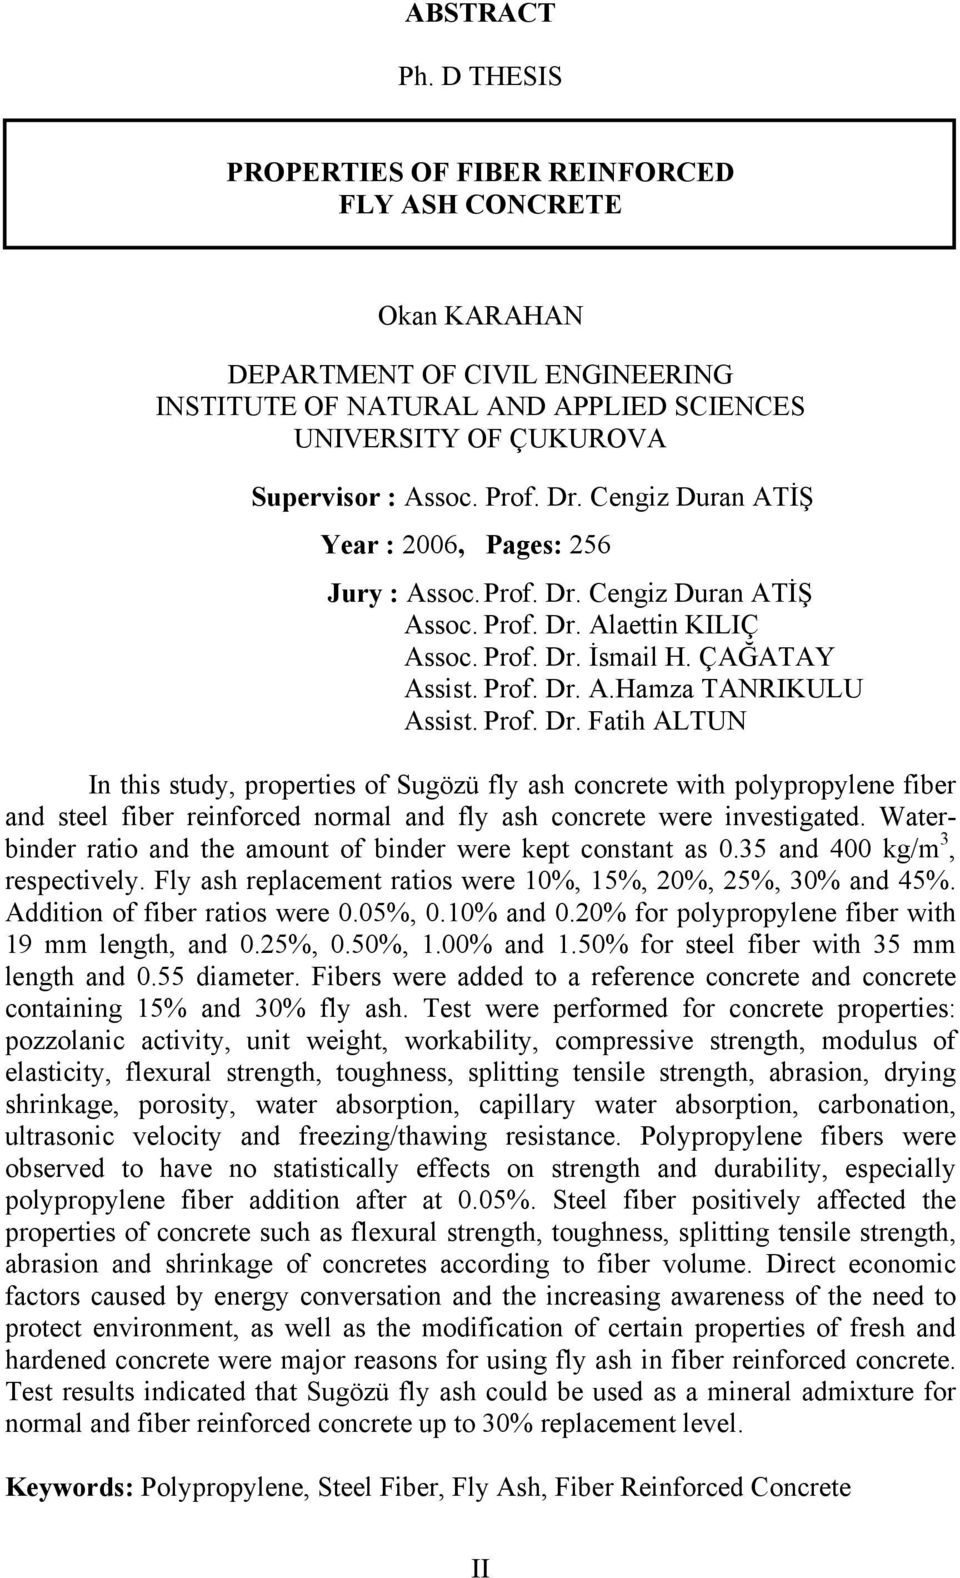 Prof. Dr. Fatih ALTUN In this study, properties of Sugözü fly ash concrete with polypropylene fiber and steel fiber reinforced normal and fly ash concrete were investigated.